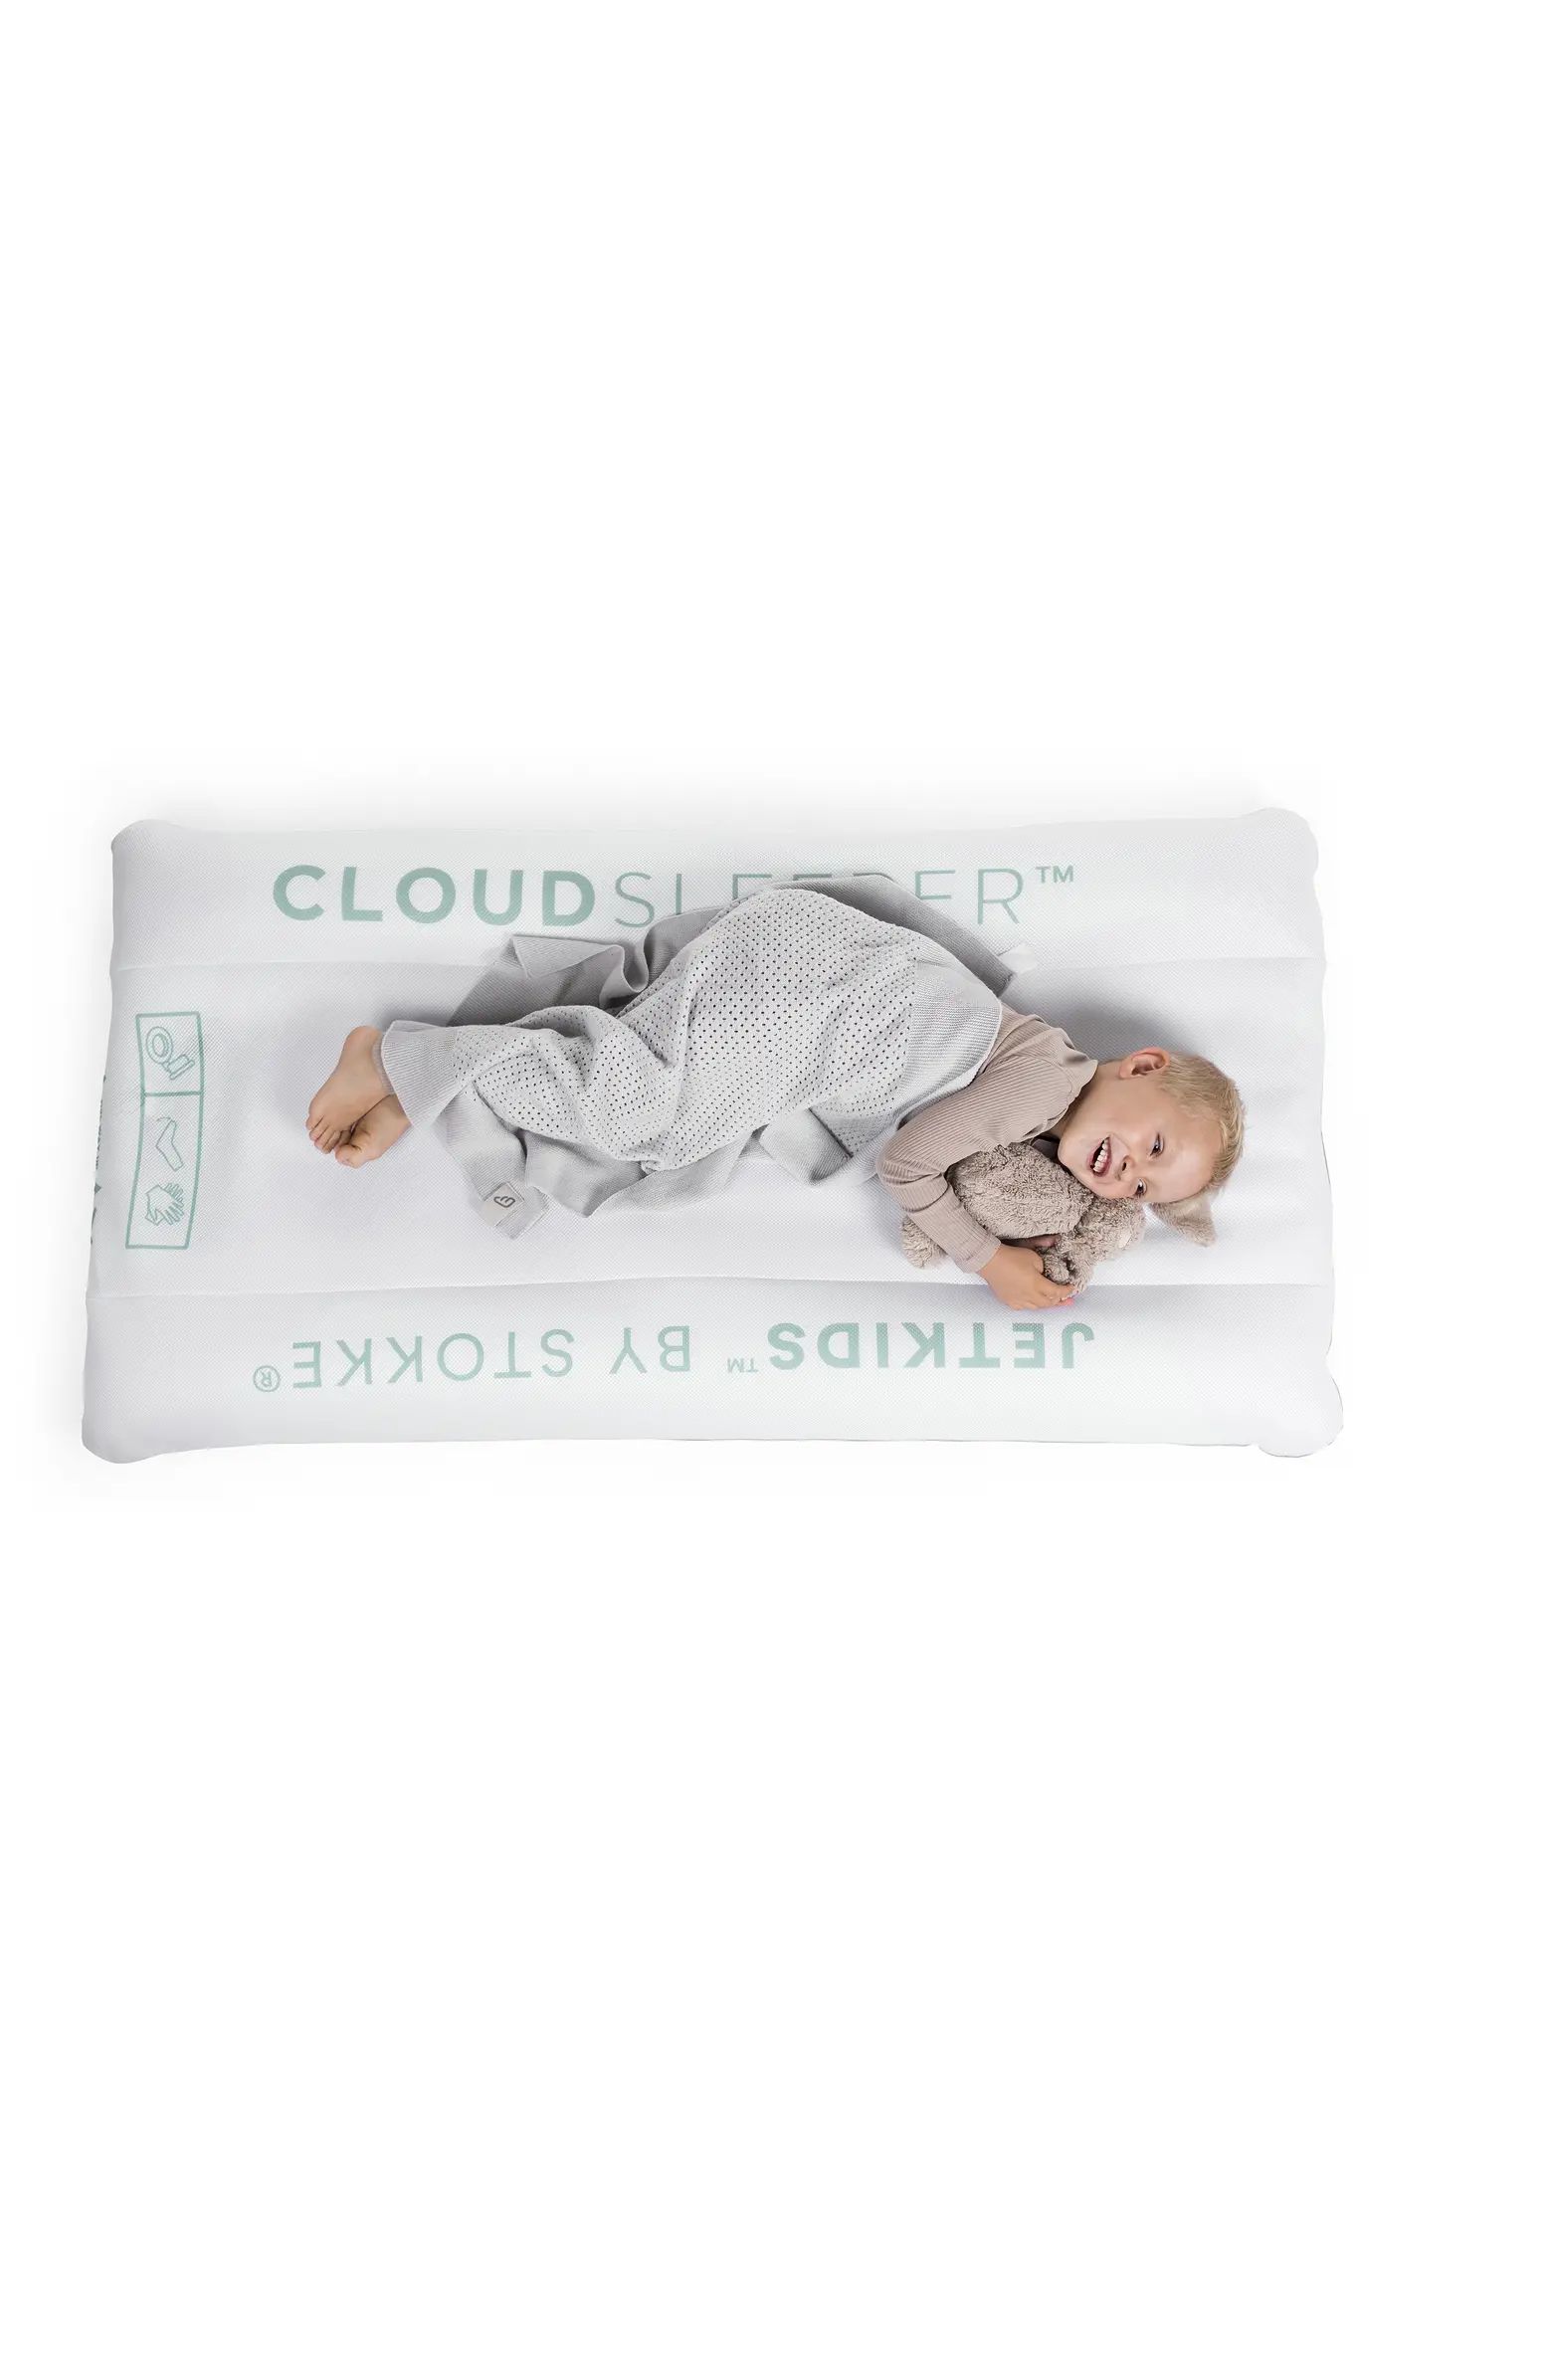 Jetkids by Stokke CloudSleeper™ Inflatable Travel Bed | Nordstrom